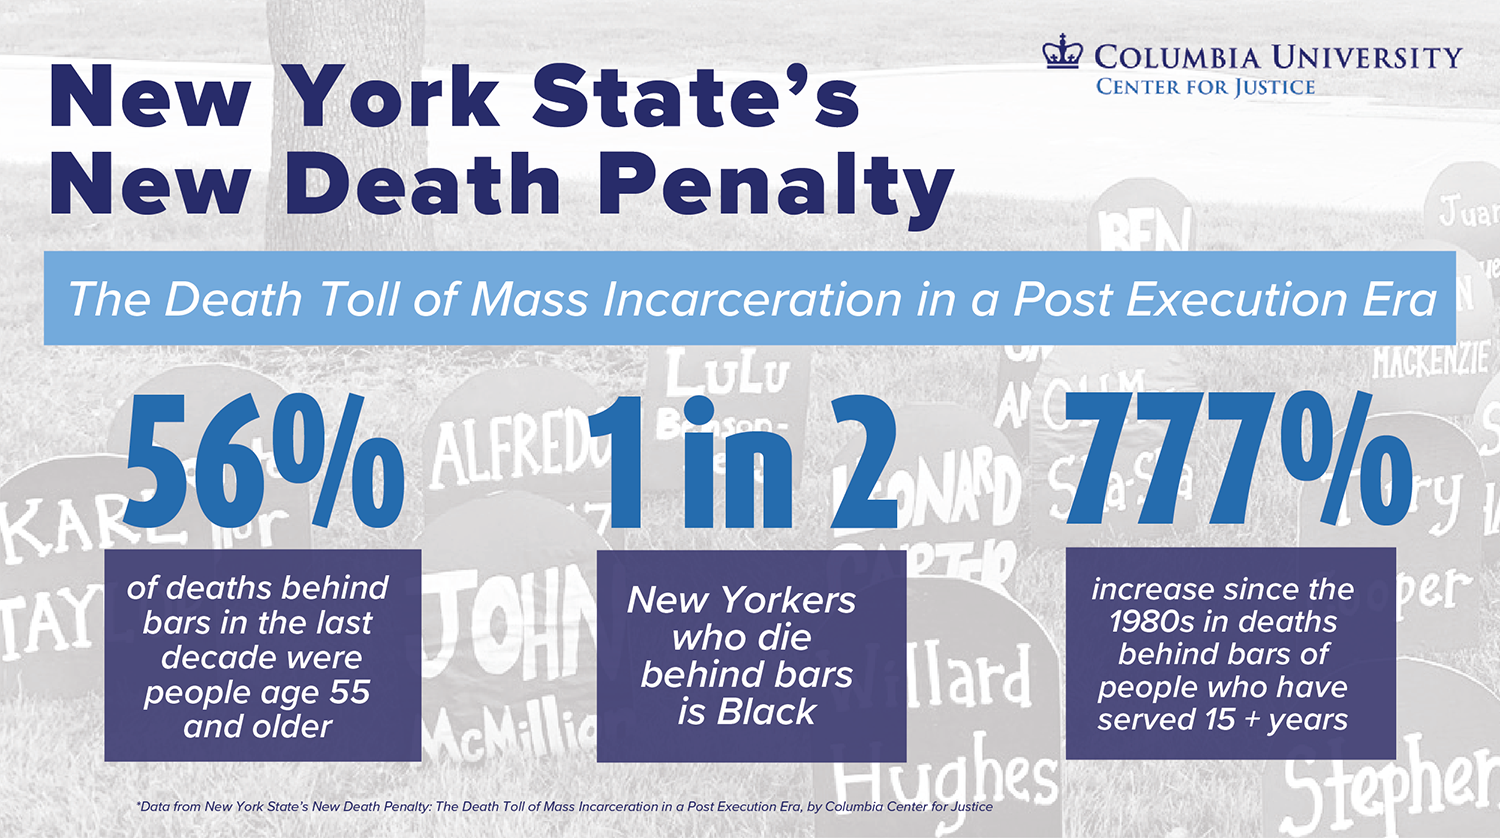 New York State's New Death Penalty. The Death Toll of Mass Incarceration in a Post Execution Era. 